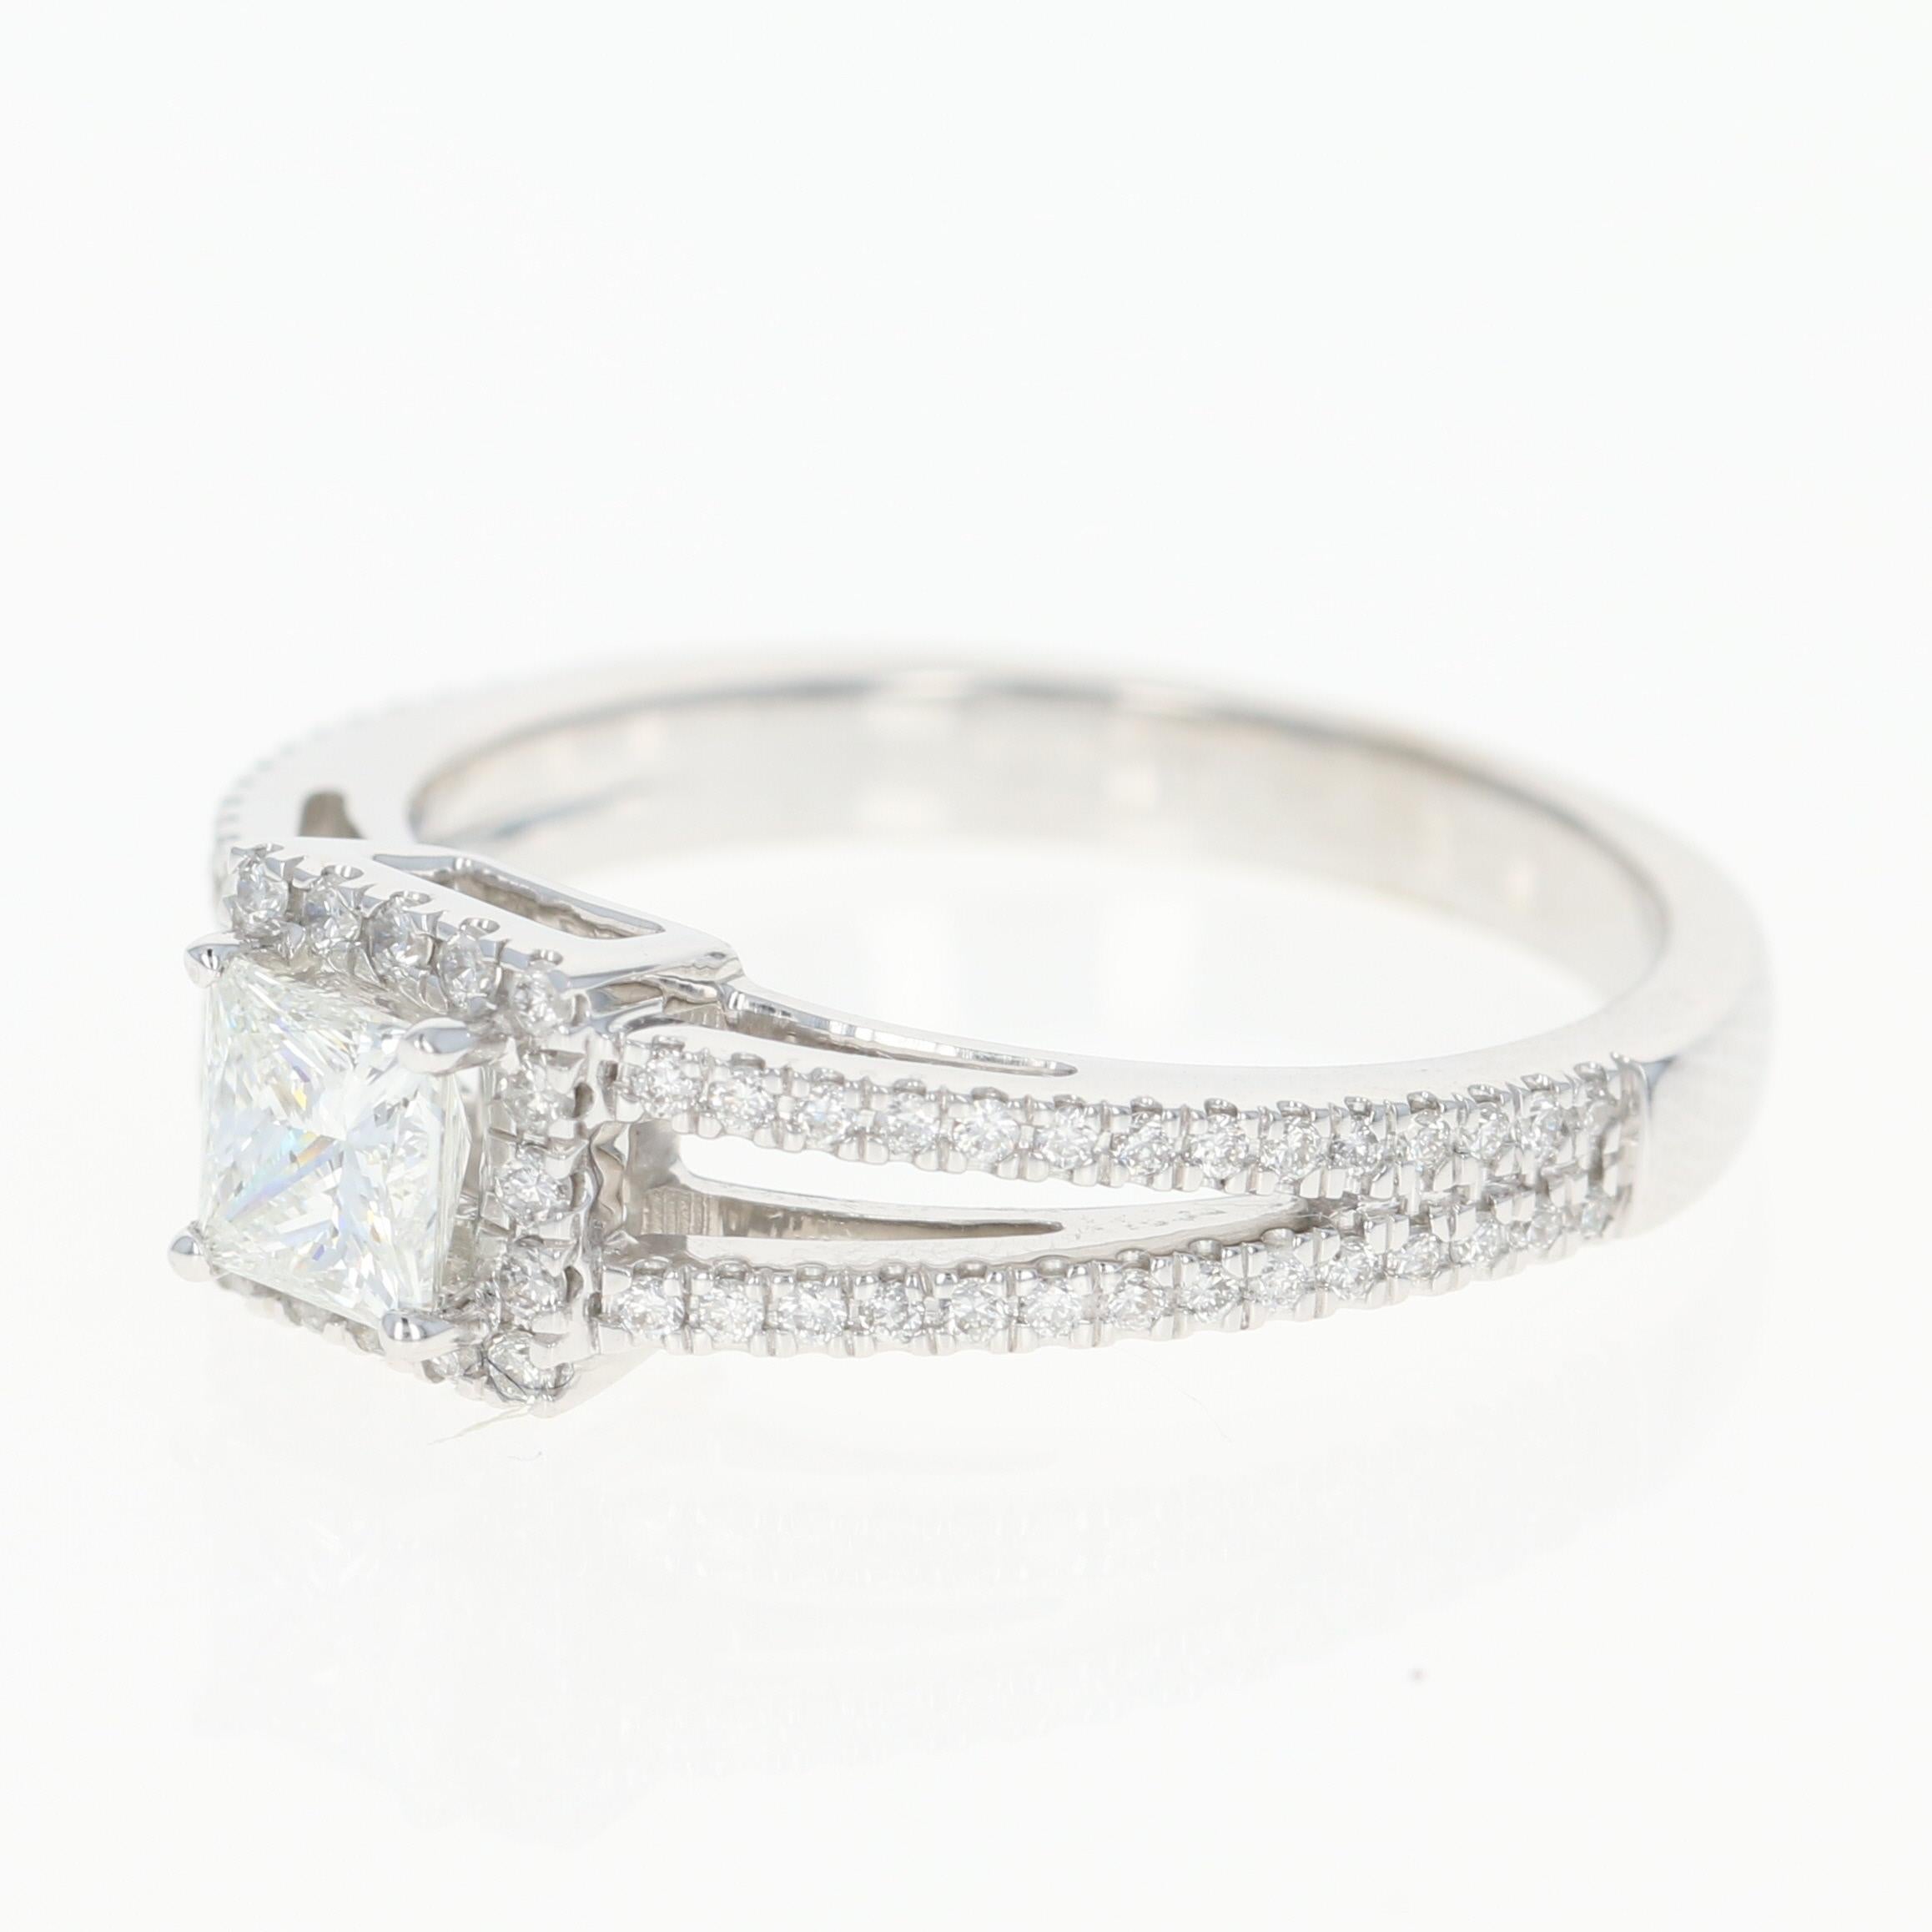 Put the sparkle into your special someone’s eyes when you propose with this exquisite engagement ring! Fashioned in popular 14k white gold, this NEW ring features a GIA-certified diamond solitaire framed in a halo of diamond accents. More accent